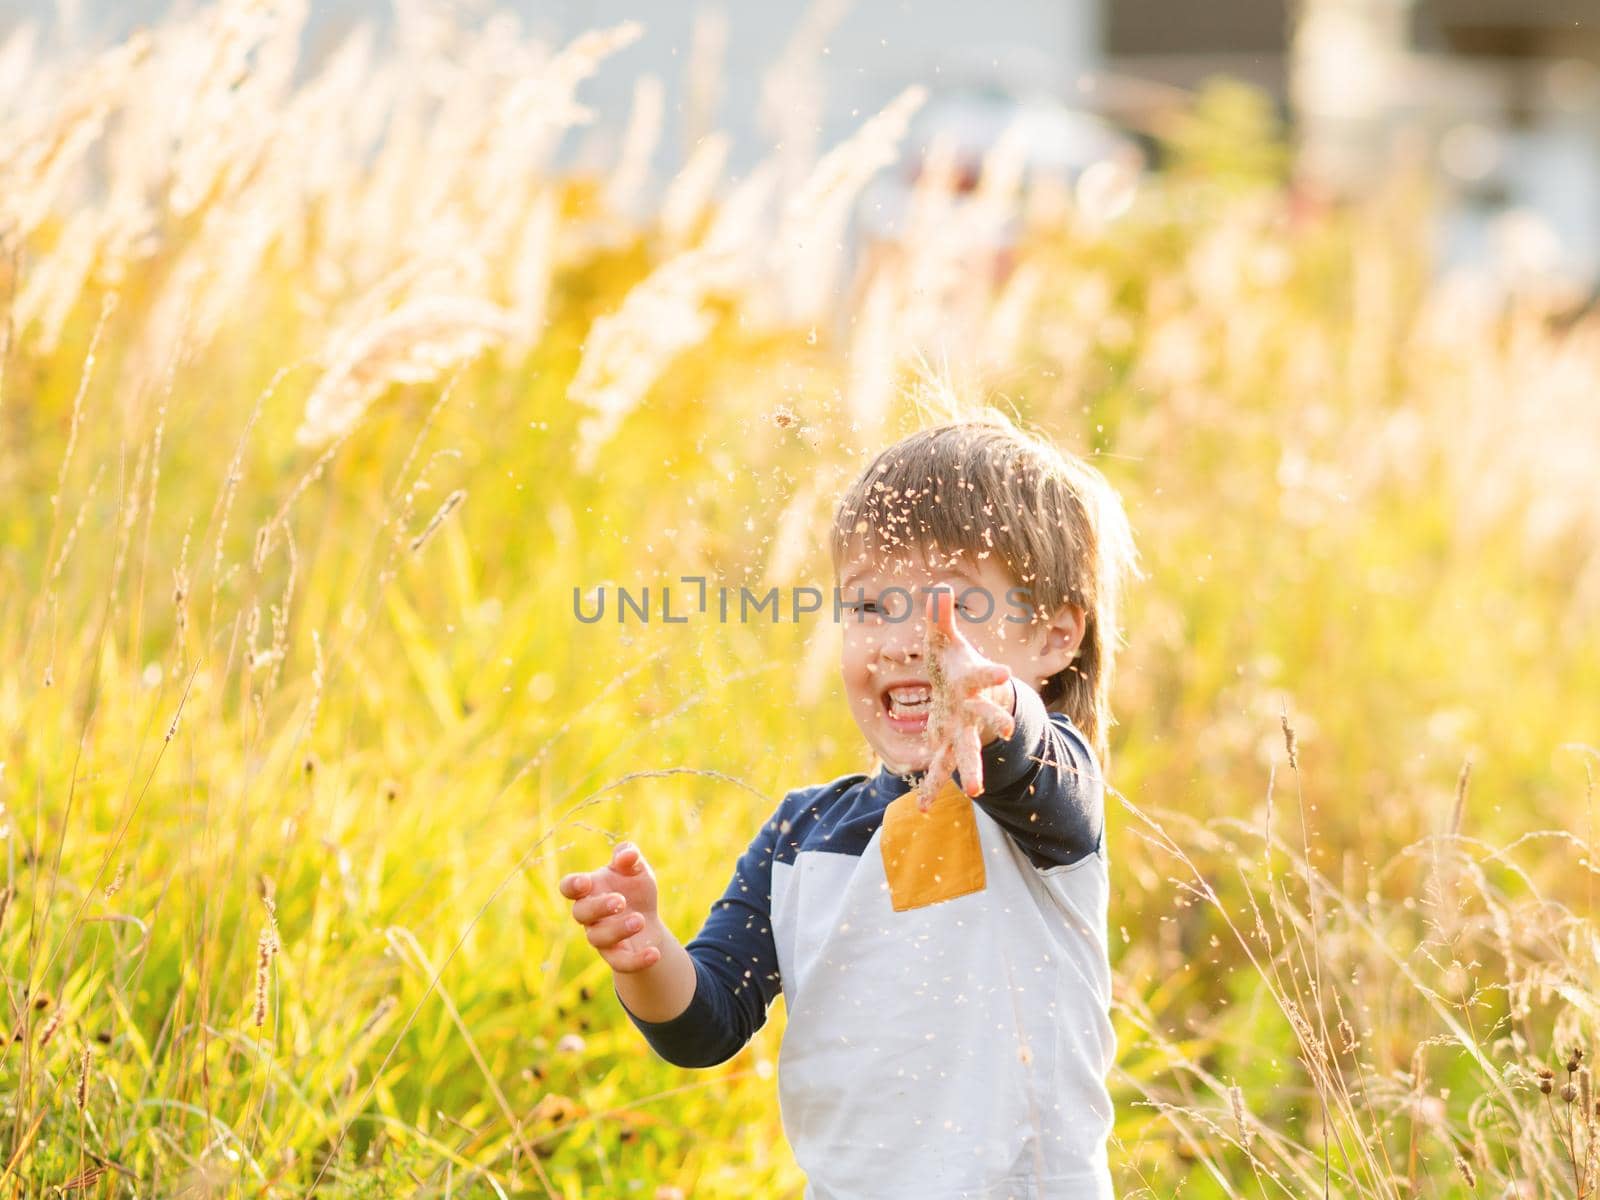 Cute toddler plays in field. Smiling boy throws plant seeds in the air. Autumn outdoor leisure activity for children. Fall season. by aksenovko